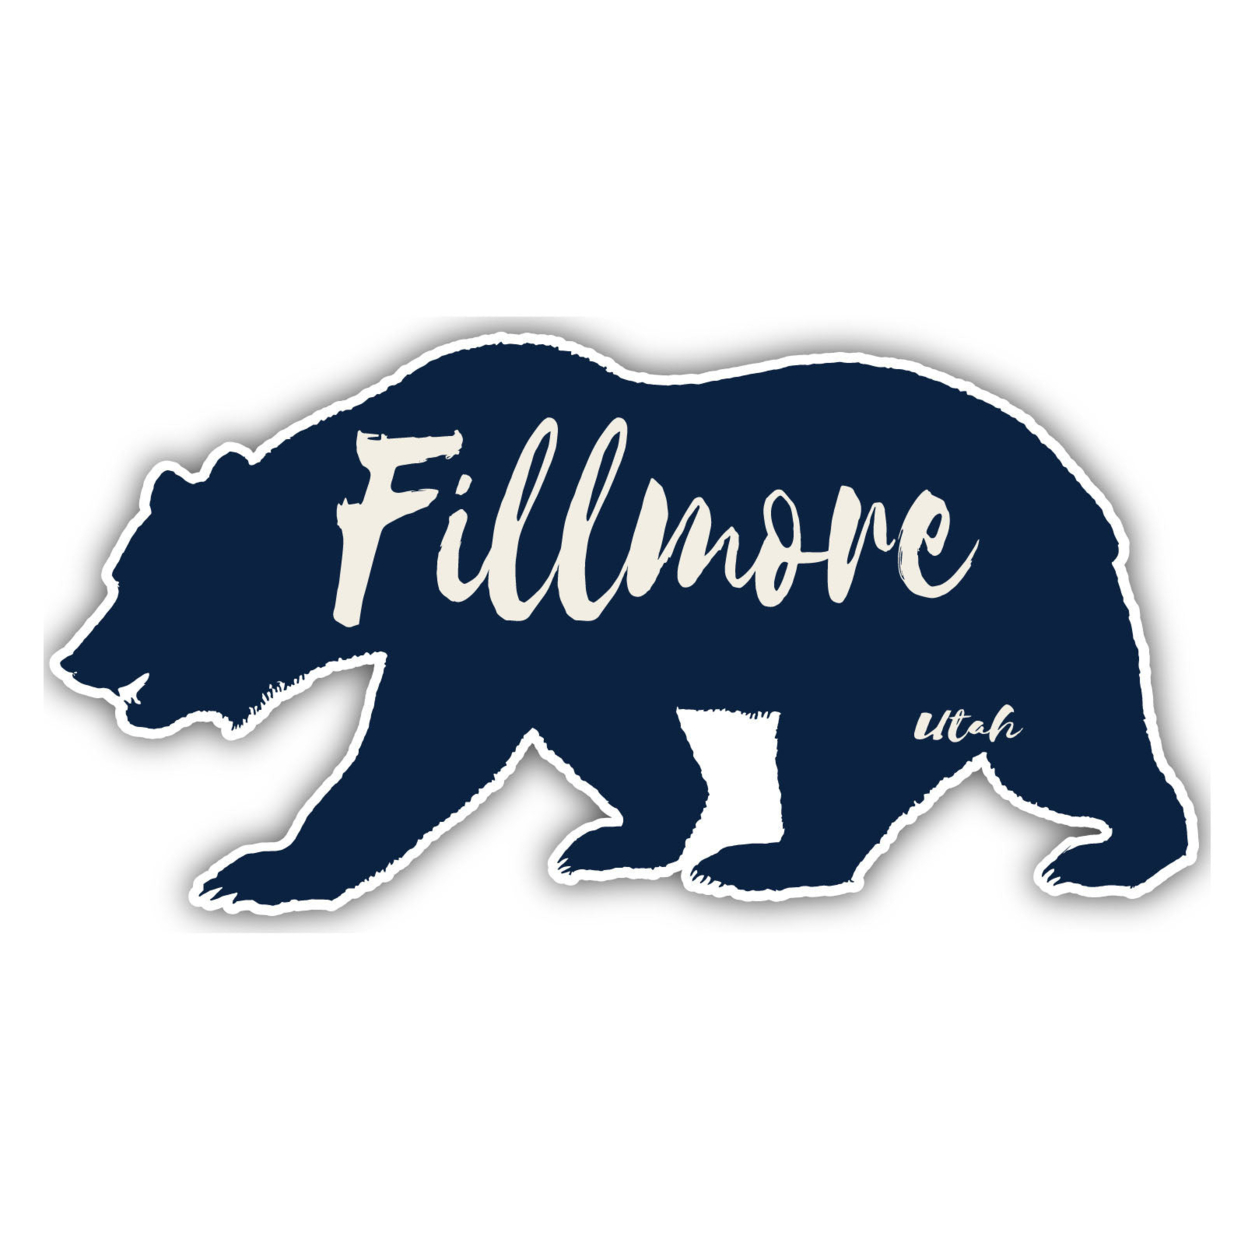 Fillmore Utah Souvenir Decorative Stickers (Choose Theme And Size) - 4-Pack, 2-Inch, Bear